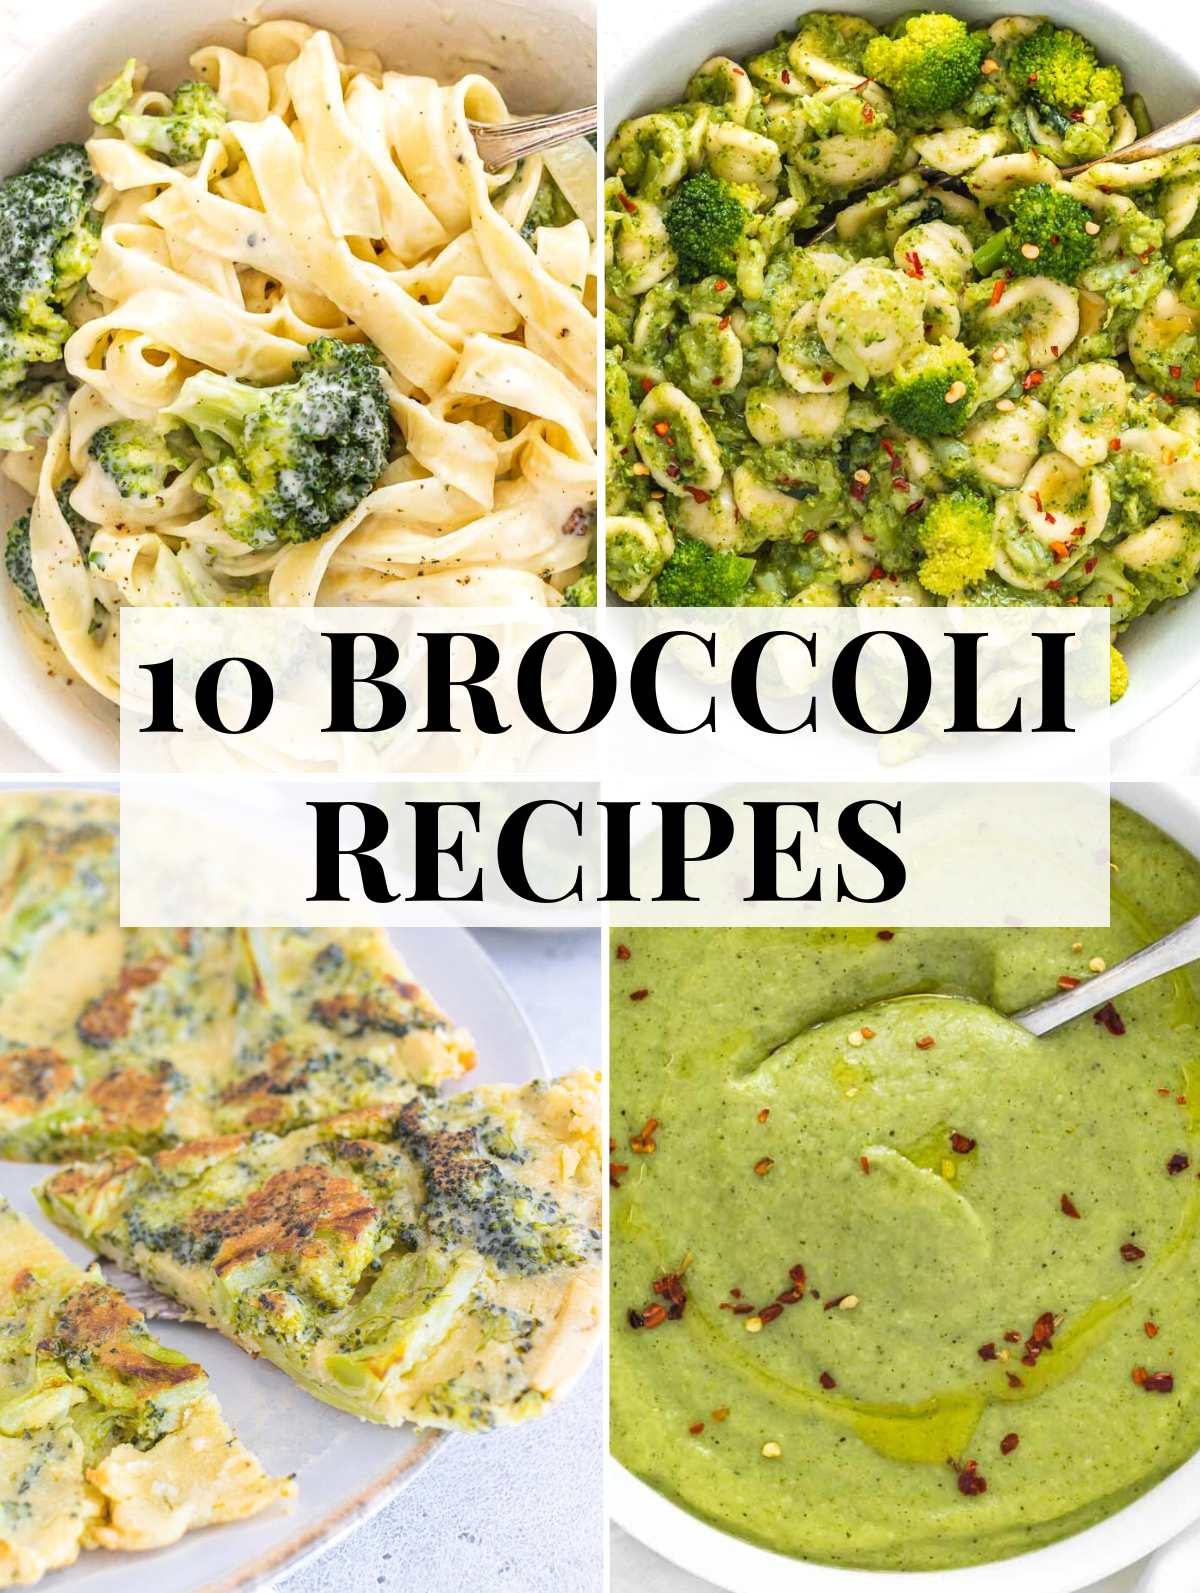 Broccoli recipes with soups and pasta